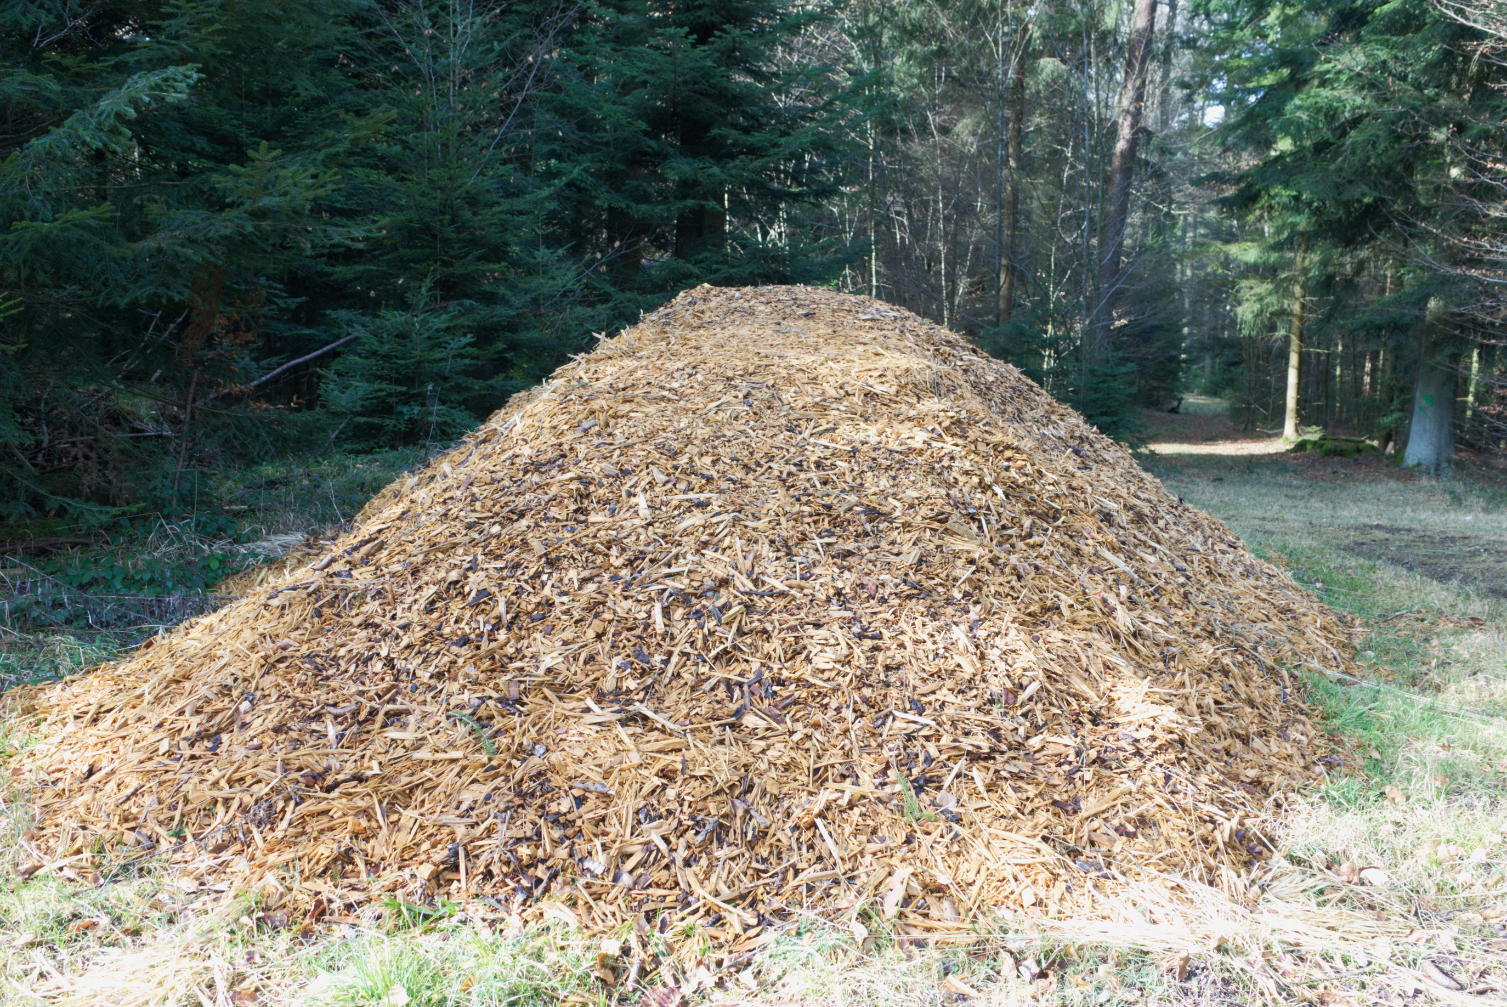 A big pile of wood chips is temporarily stored in the forest.